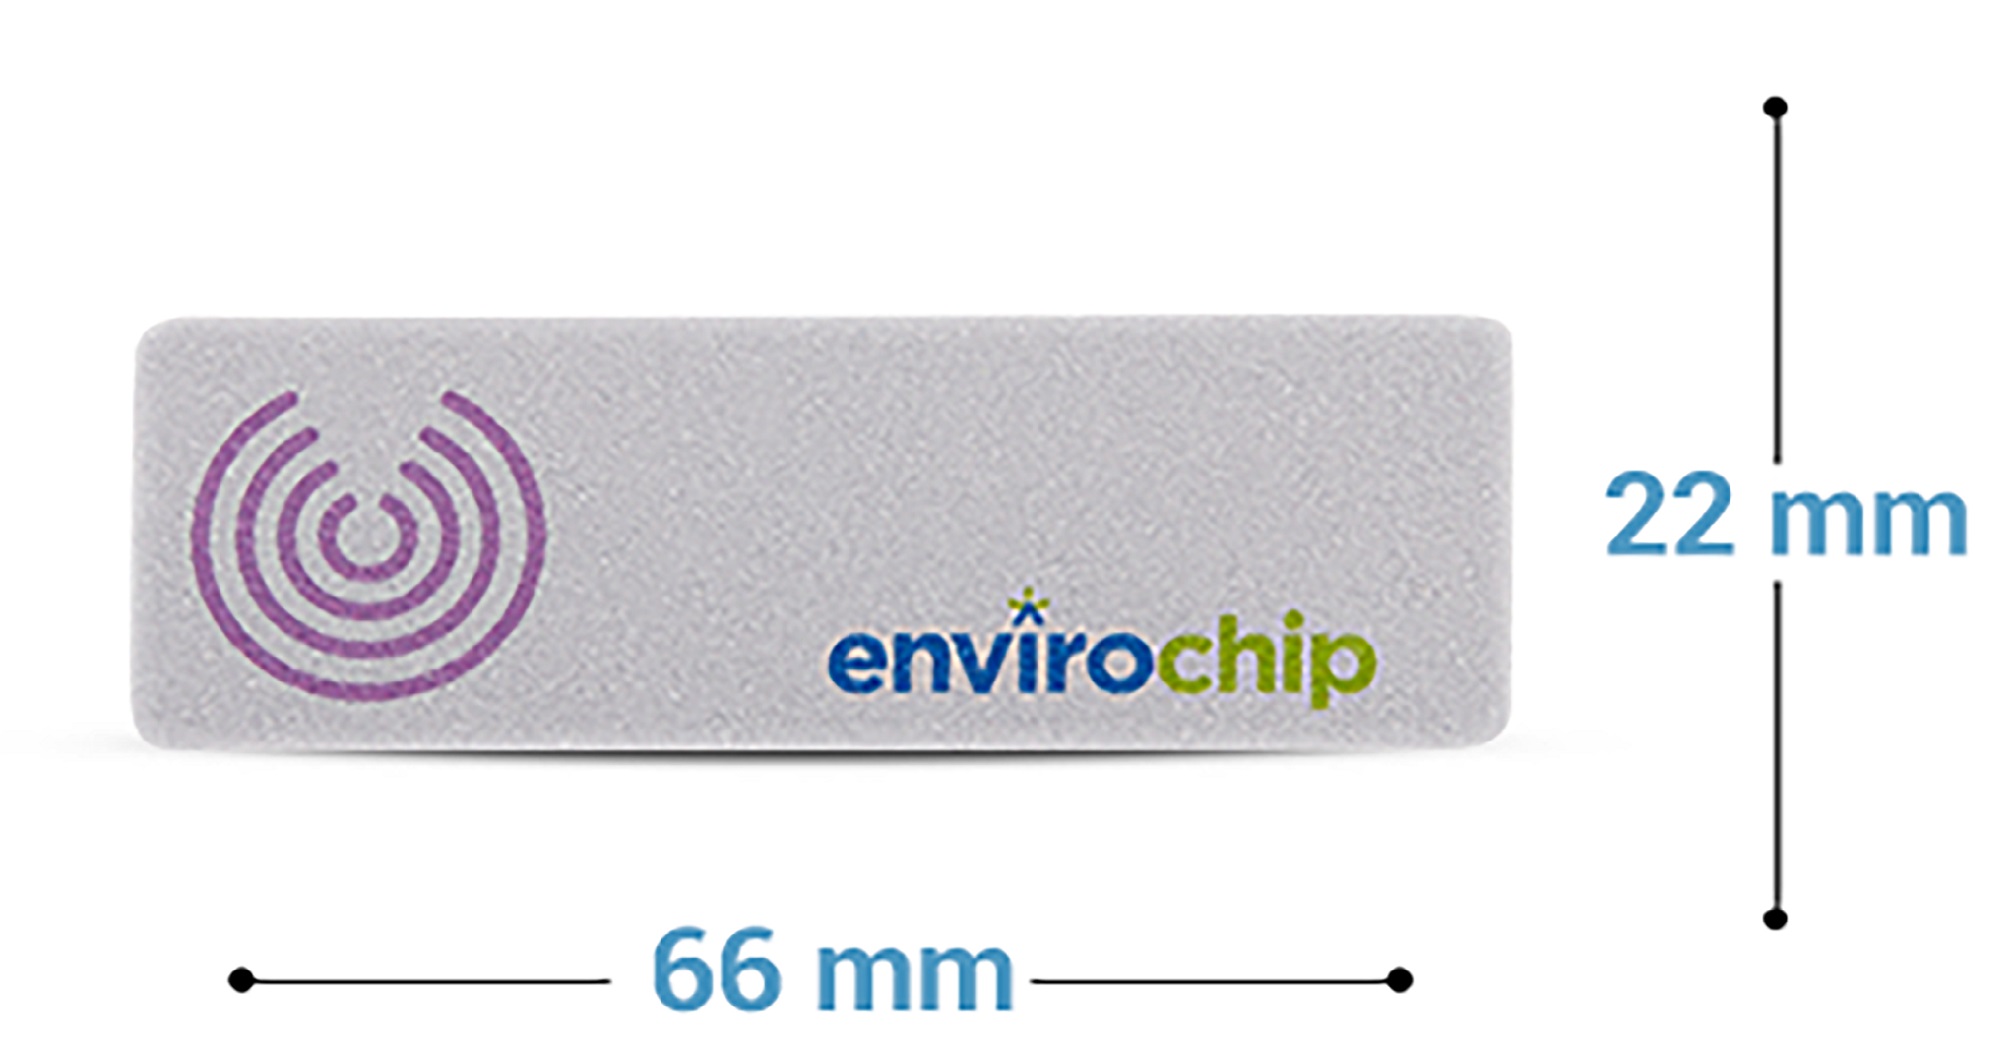 envirochip-clinically-tested-patented-anti-radiation-chip-for-laptop-elements-design-ether-silver